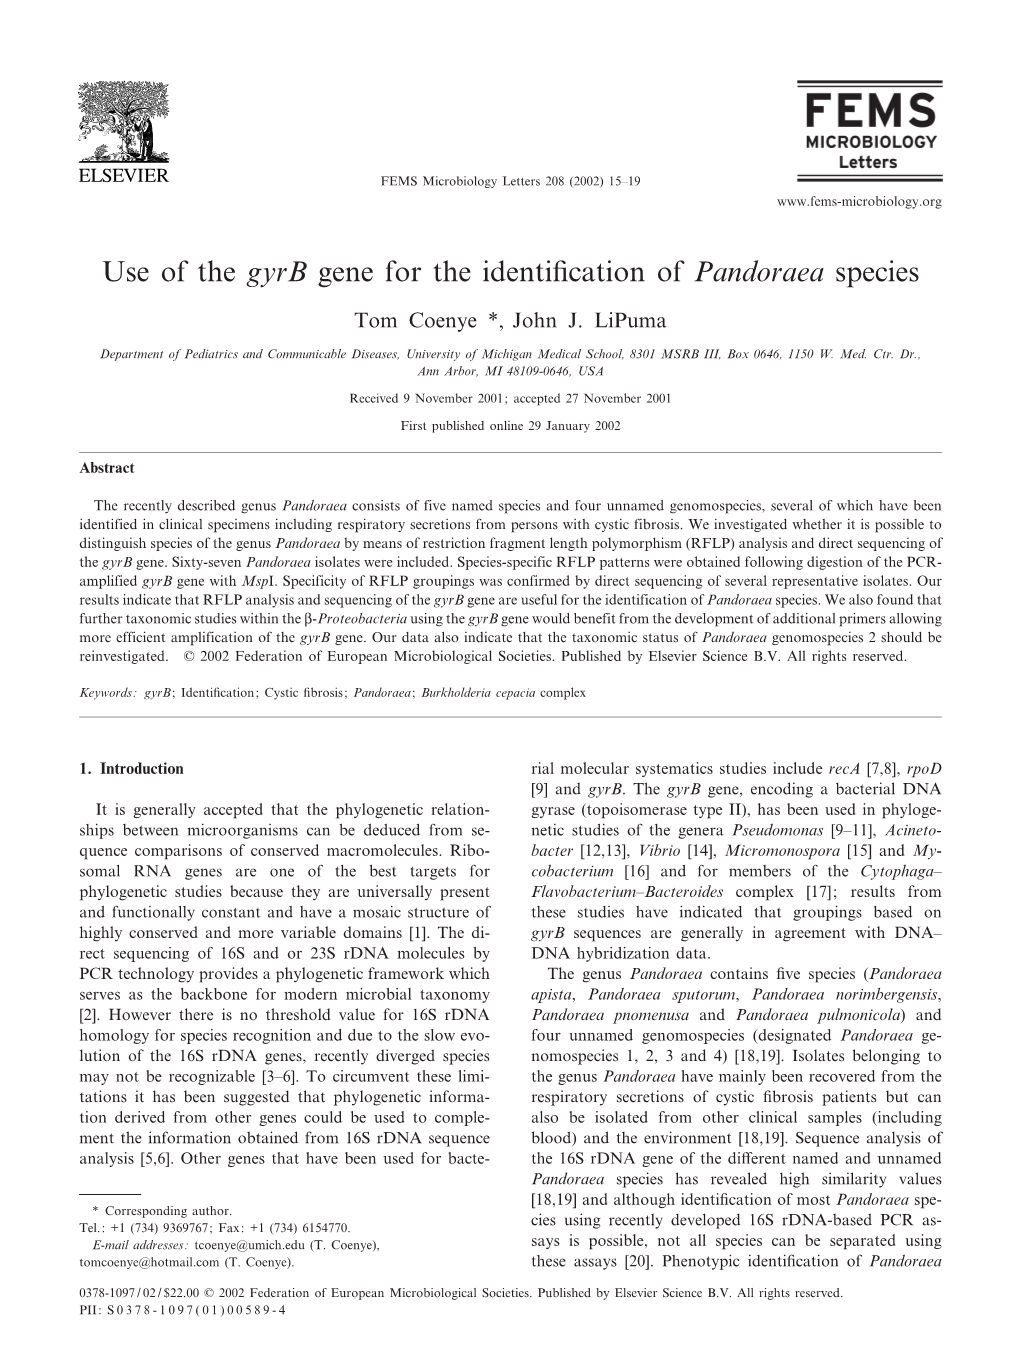 Use of the Gyrb Gene for the Identification of Pandoraea Species